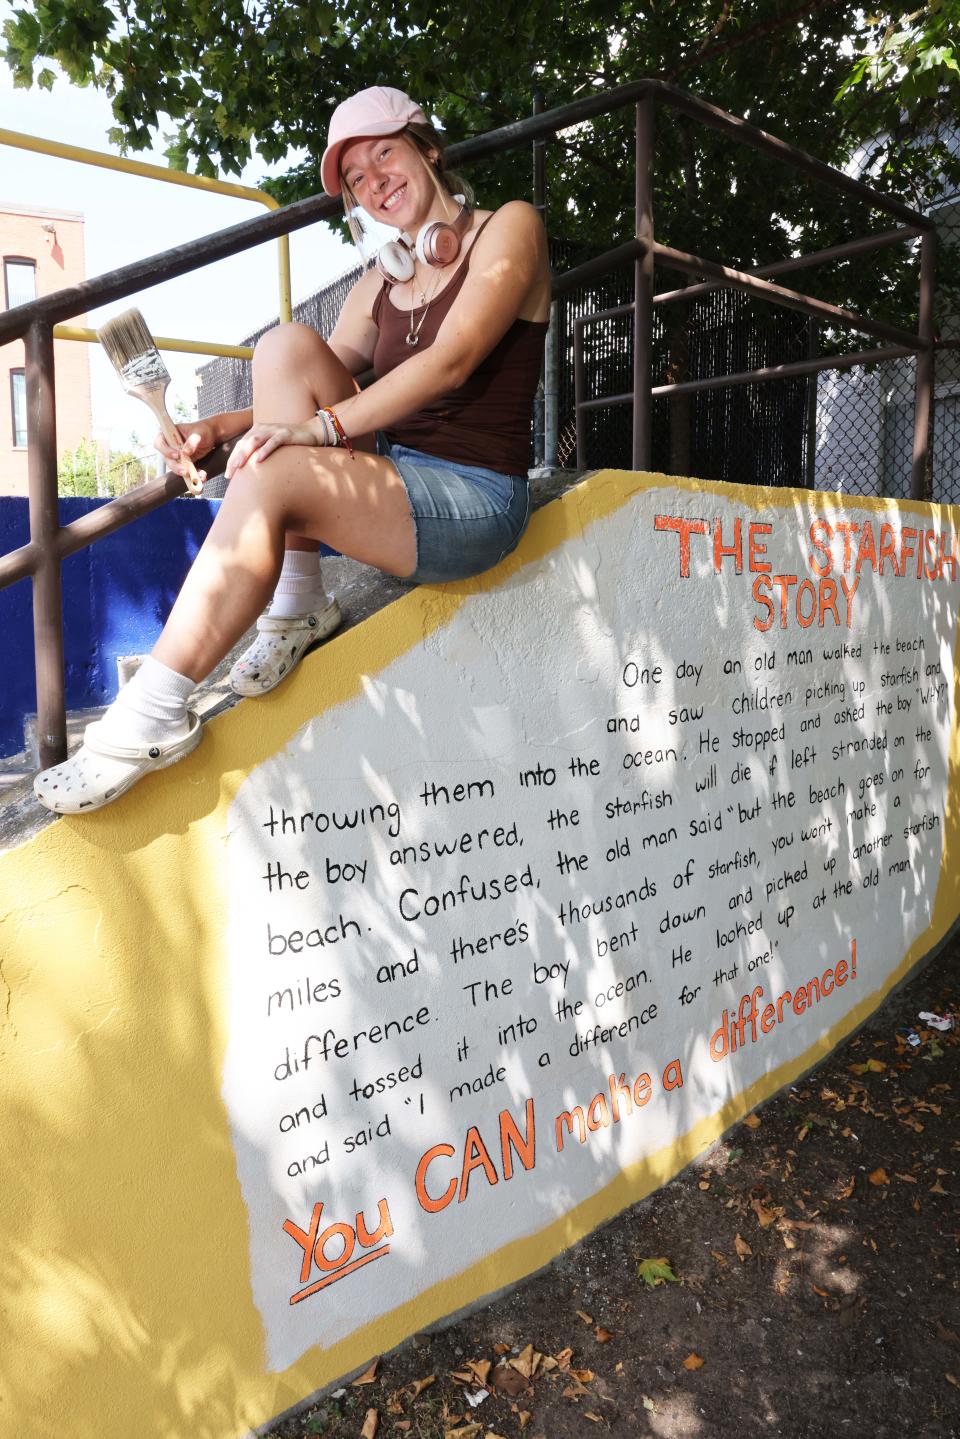 Jessica Picanzo, 22, of Brockton, takes a break from painting a mural called "Make A Difference" outside Brockton Community Access on Friday, July 29, 2022.